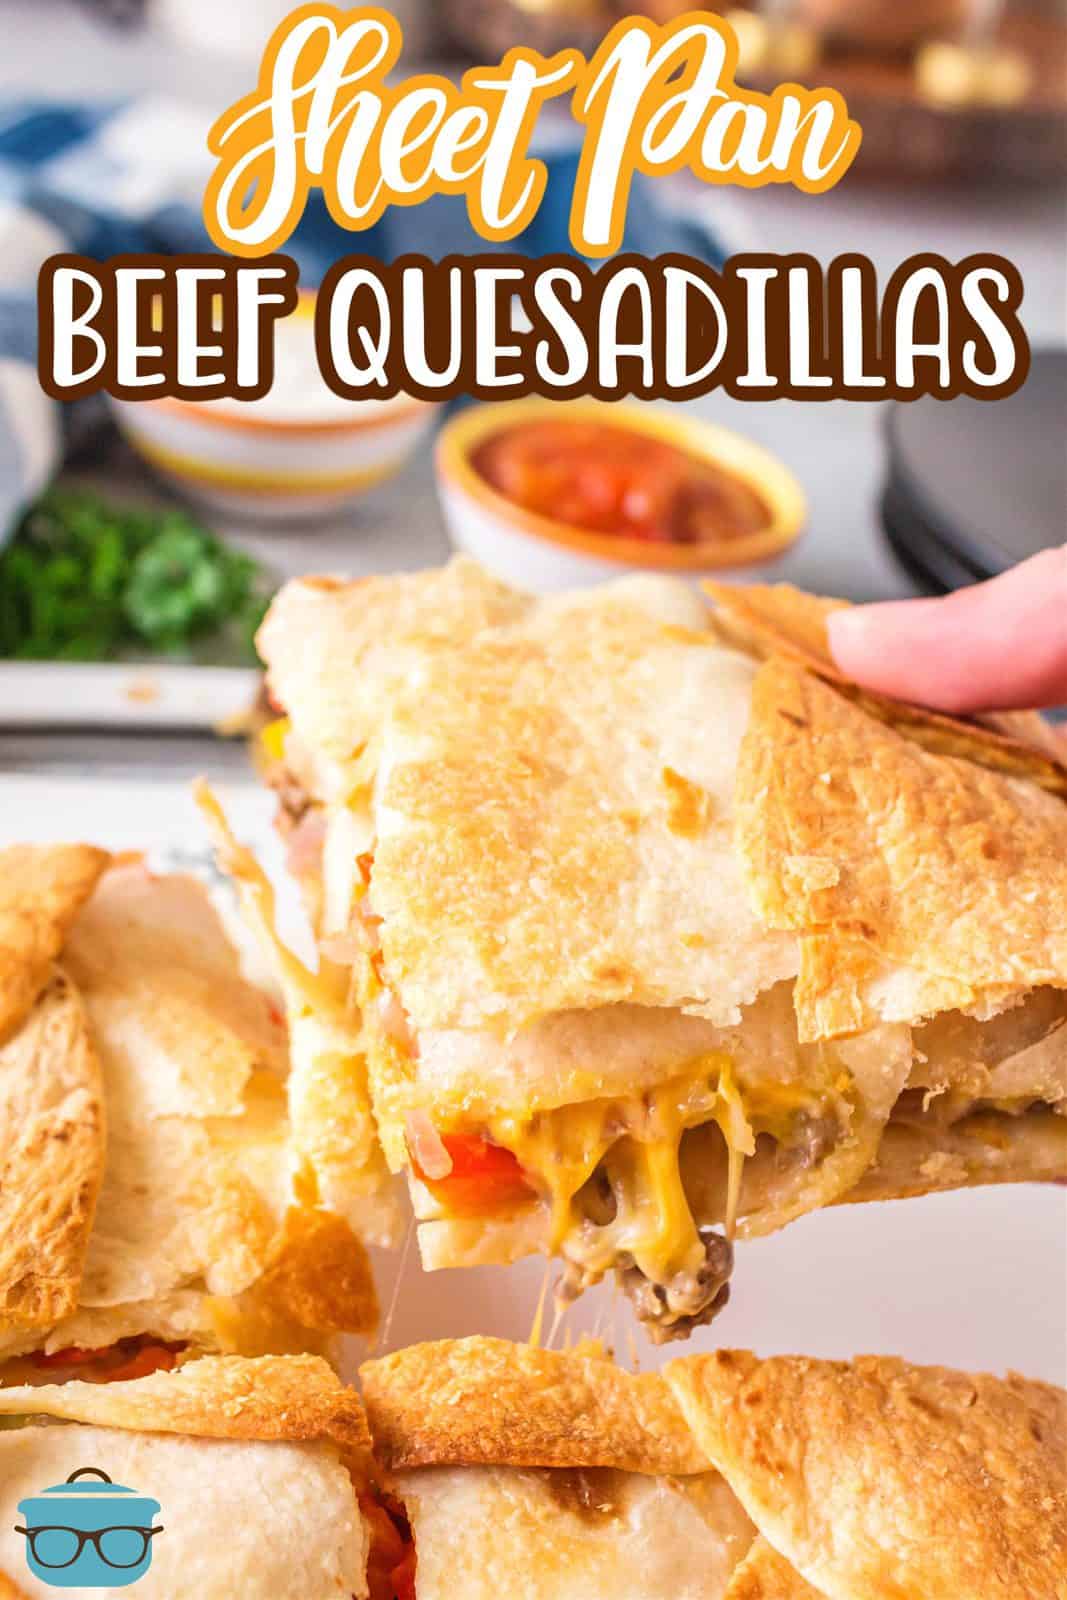 Pinterest image of hand holding up one slice of the Sheet Pan Beef Quesadillas.